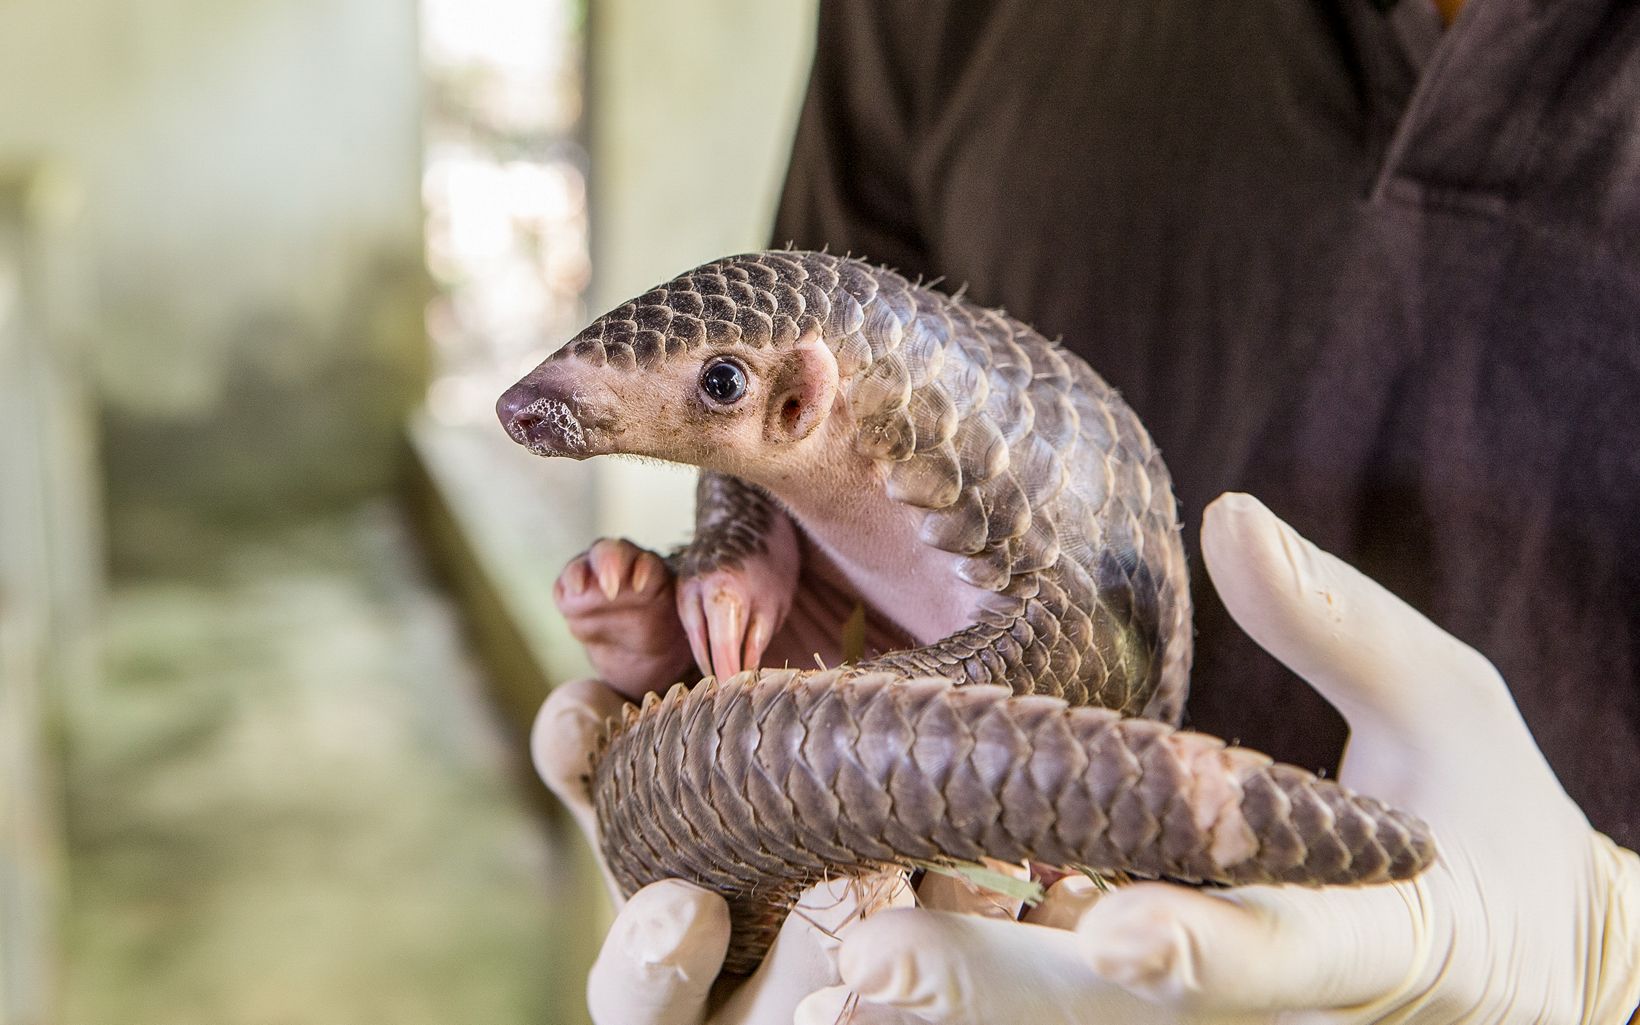 Rescue worker holding two-month-old baby at the Carnivore and Pangolin Conservation Program at Cuc Phuong National Park in Vietnam. 